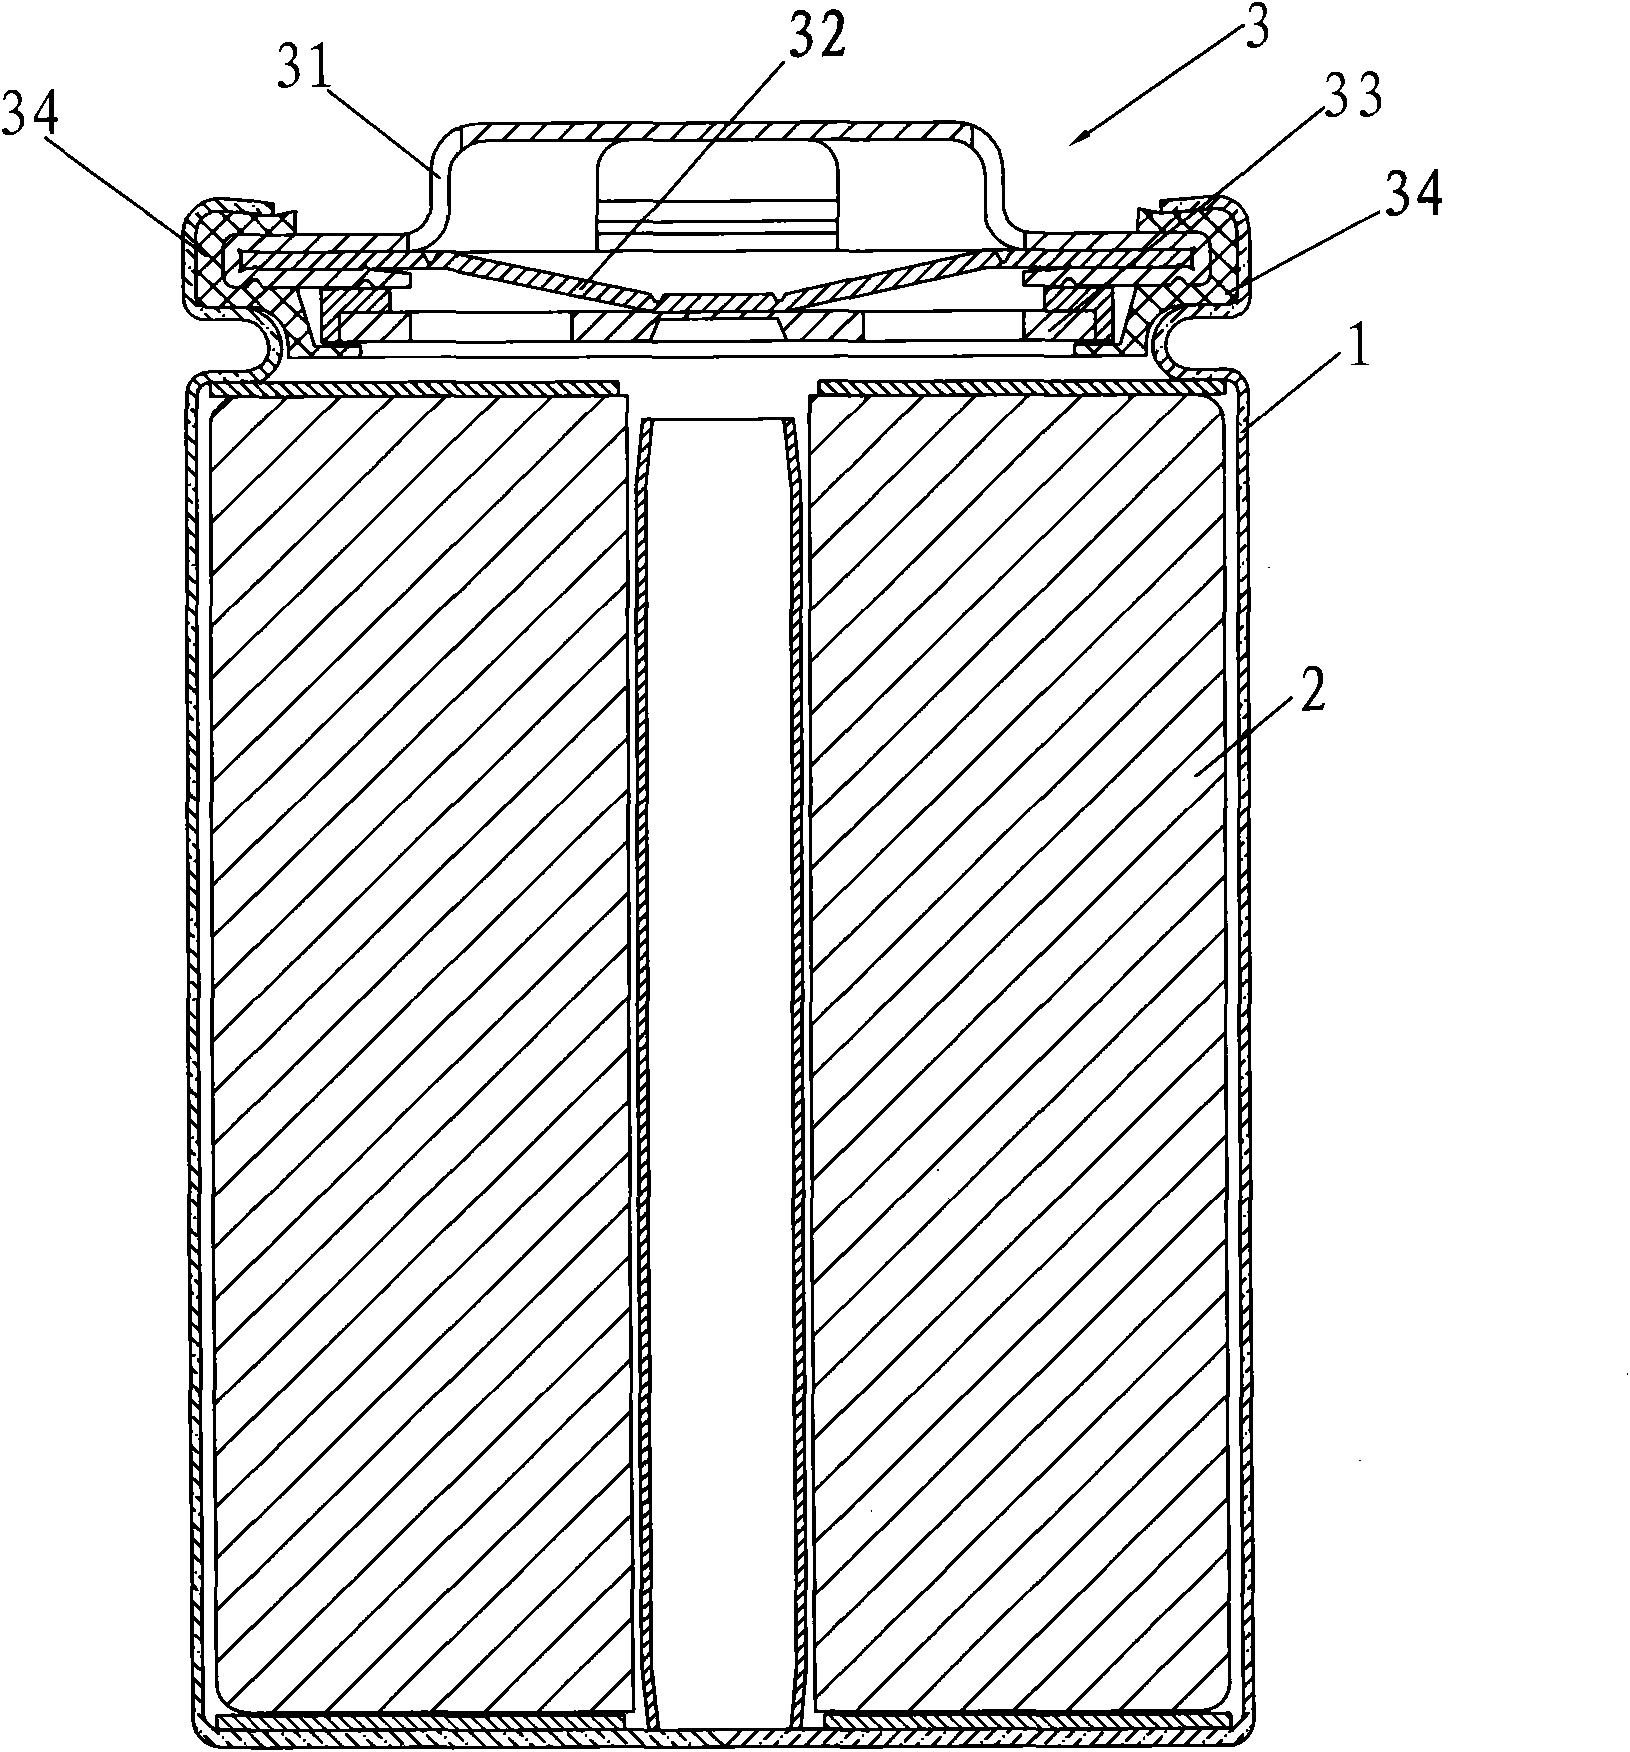 Cylindrical lithium ion battery